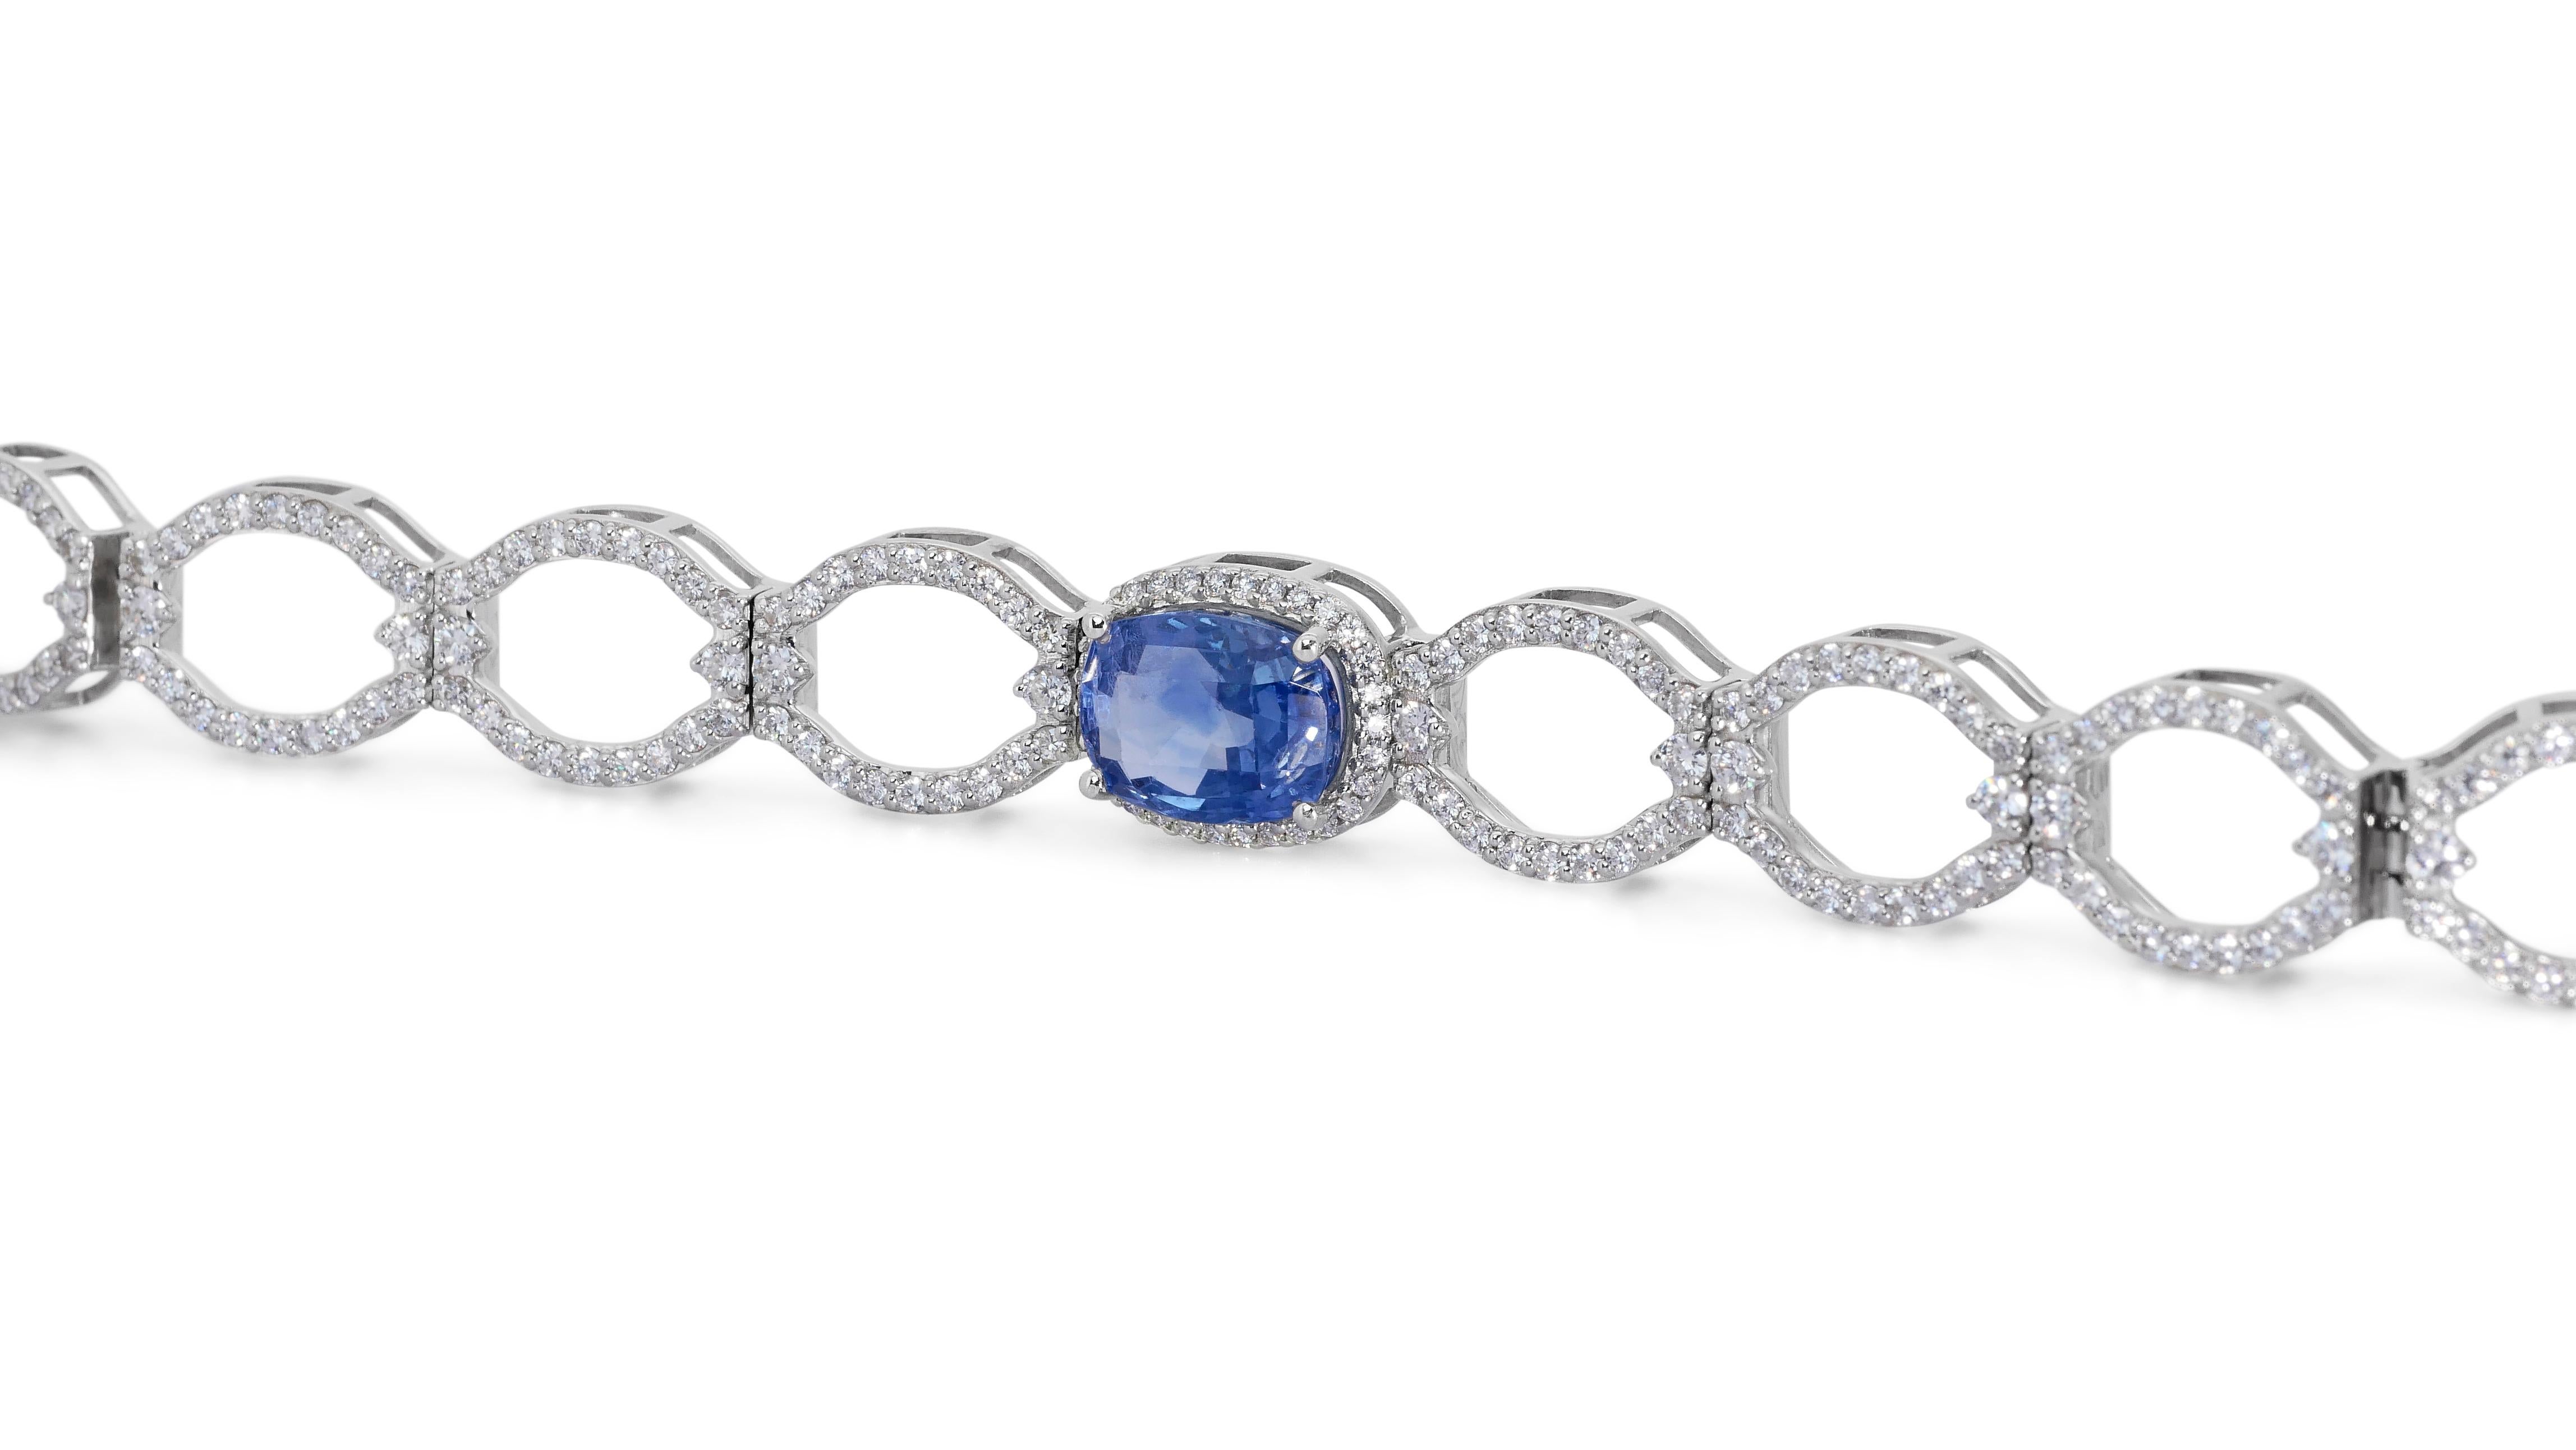 14k White Gold Bracelet w/ 9.72ct Natural Sapphire and Natural Diamonds GIA Cert For Sale 3